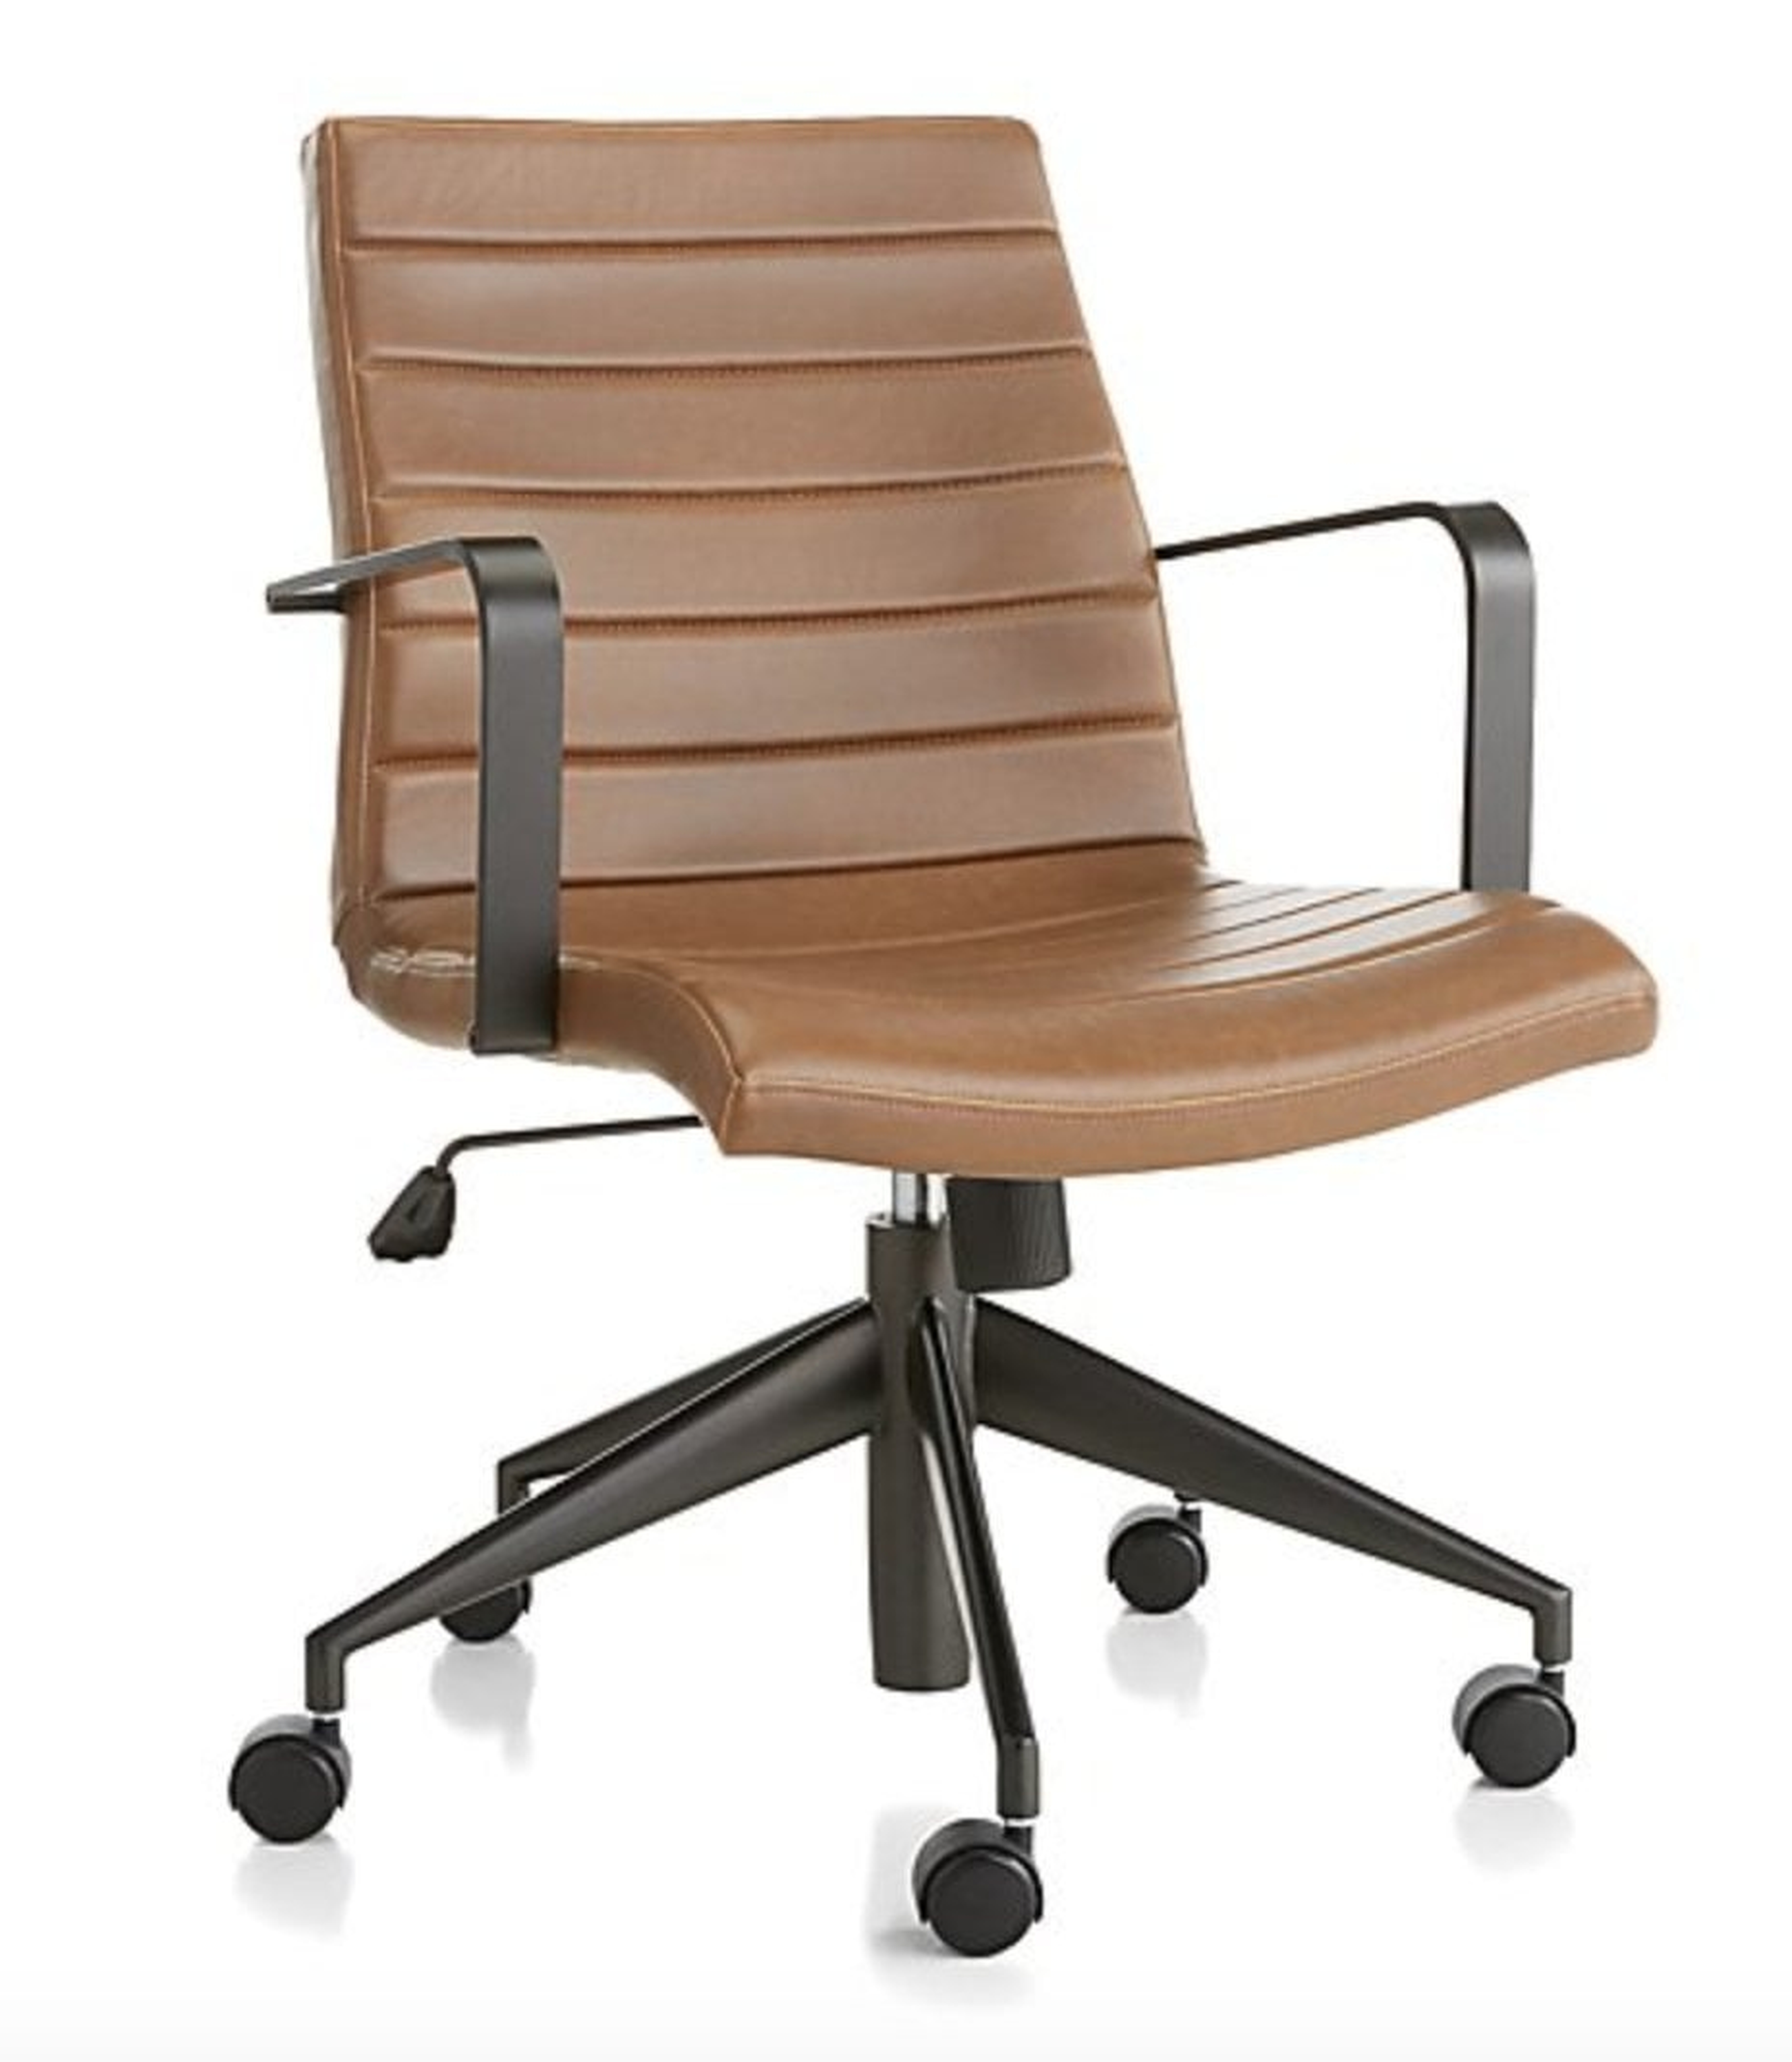 Graham Brown Desk Chair - Crate and Barrel